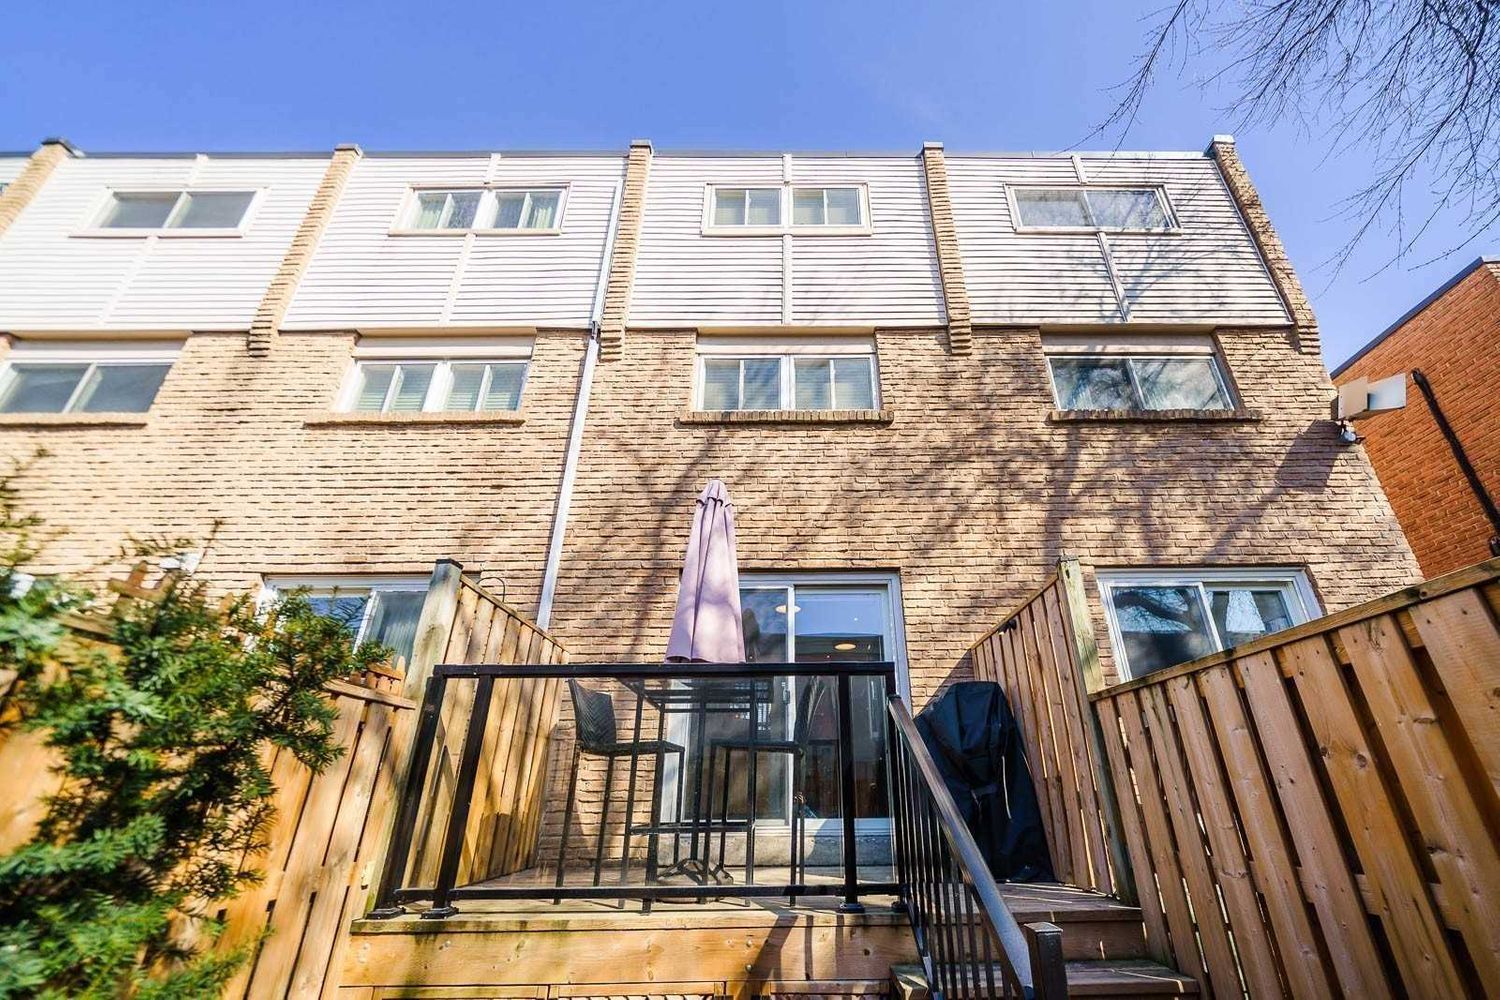 1666 Queen Street E. 1666 Queen St East Townhomes is located in  East End, Toronto - image #3 of 3